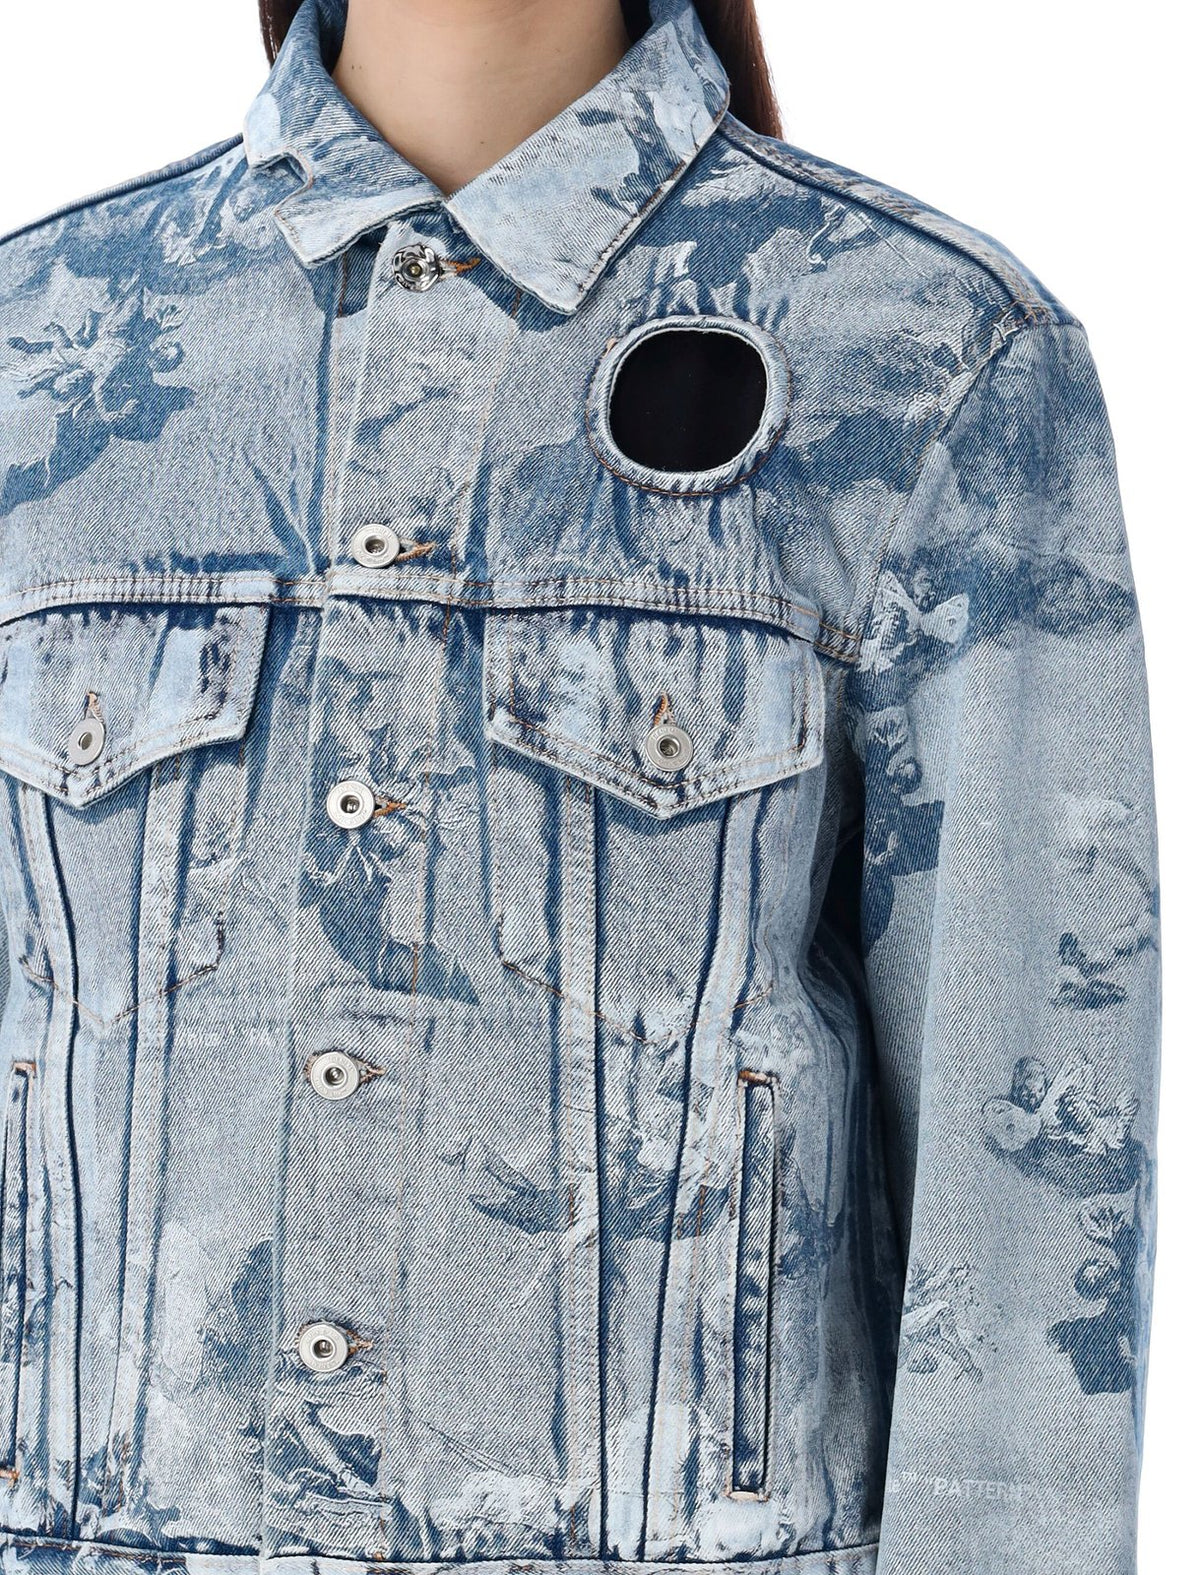 Off-White Cut-Out Long-Sleeved Denim Jacket